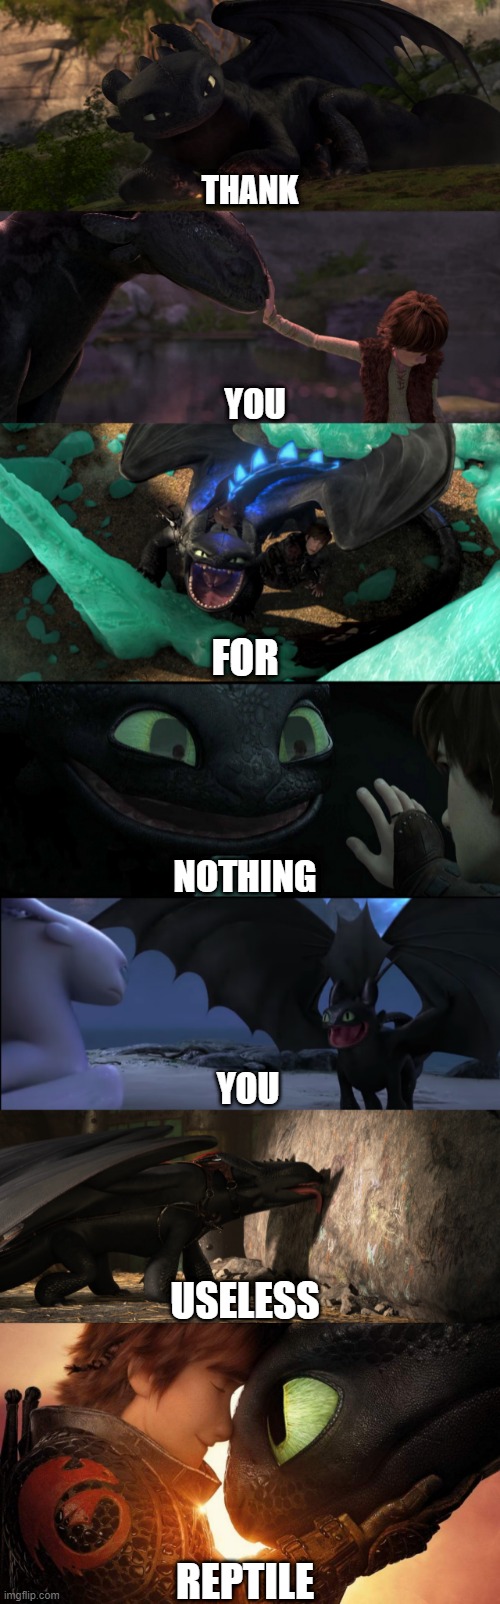 You Useless Reptile |  THANK; YOU; FOR; NOTHING; YOU; USELESS; REPTILE | image tagged in httyd,toothless | made w/ Imgflip meme maker